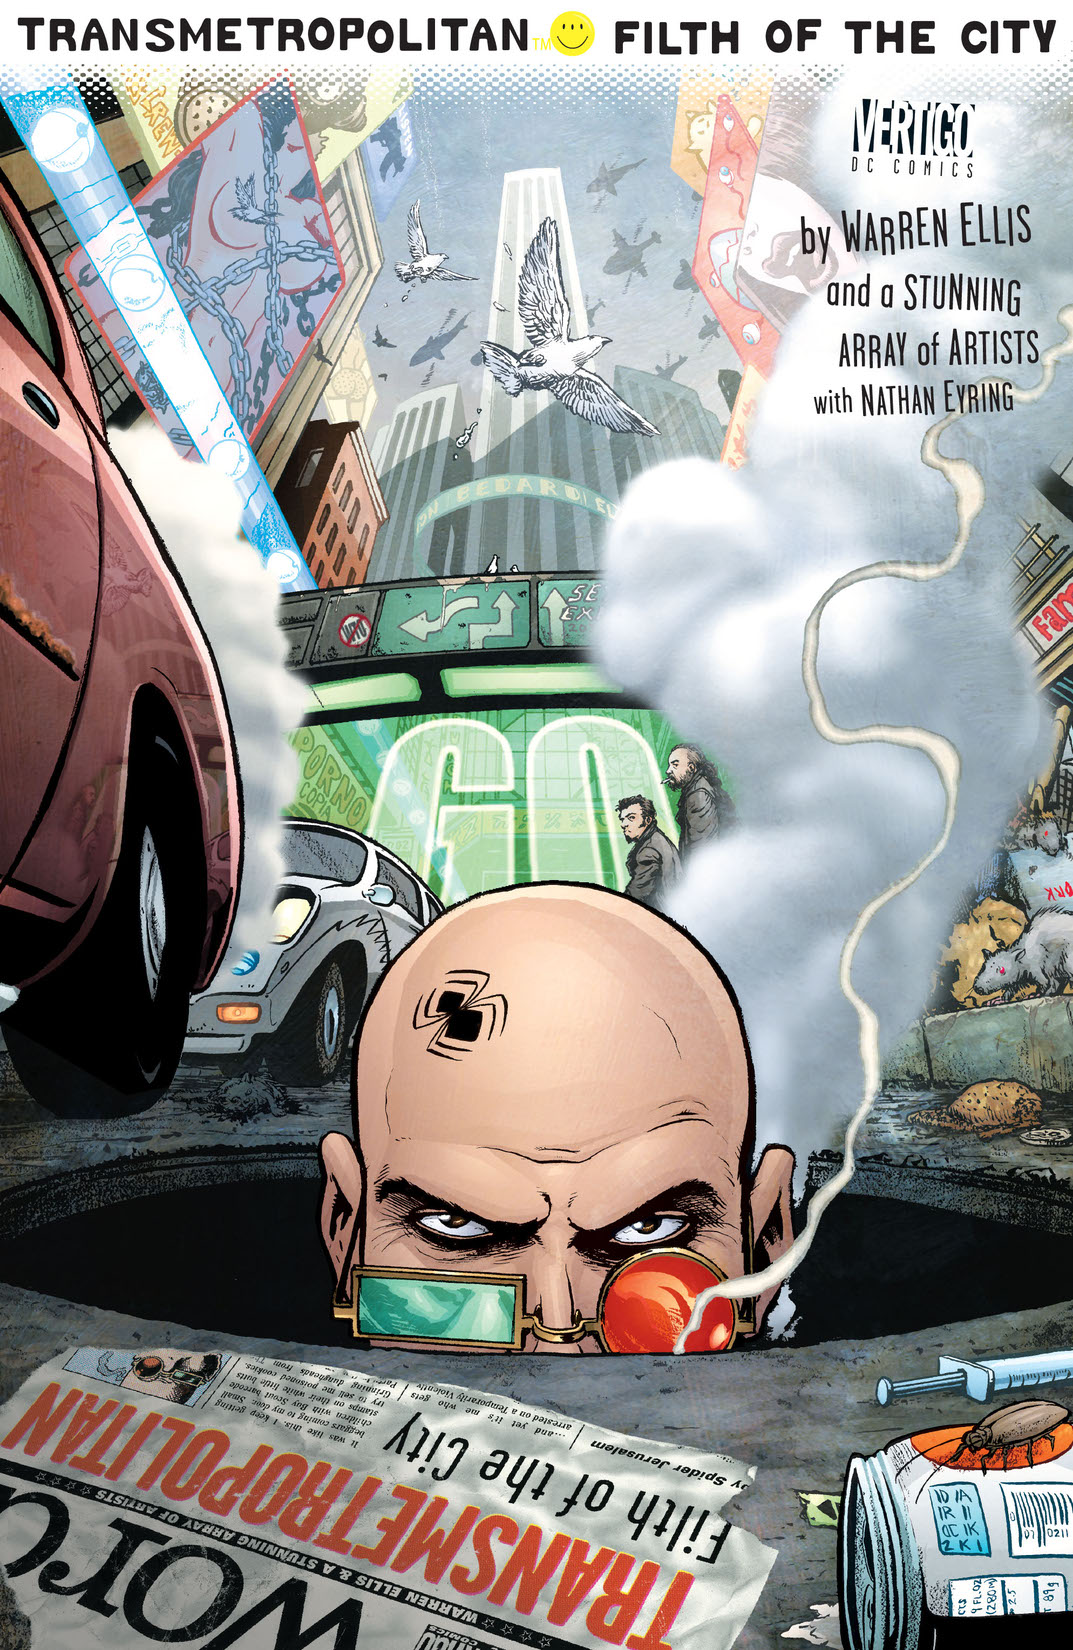 Transmetropolitan: Filth of the City #1 preview images